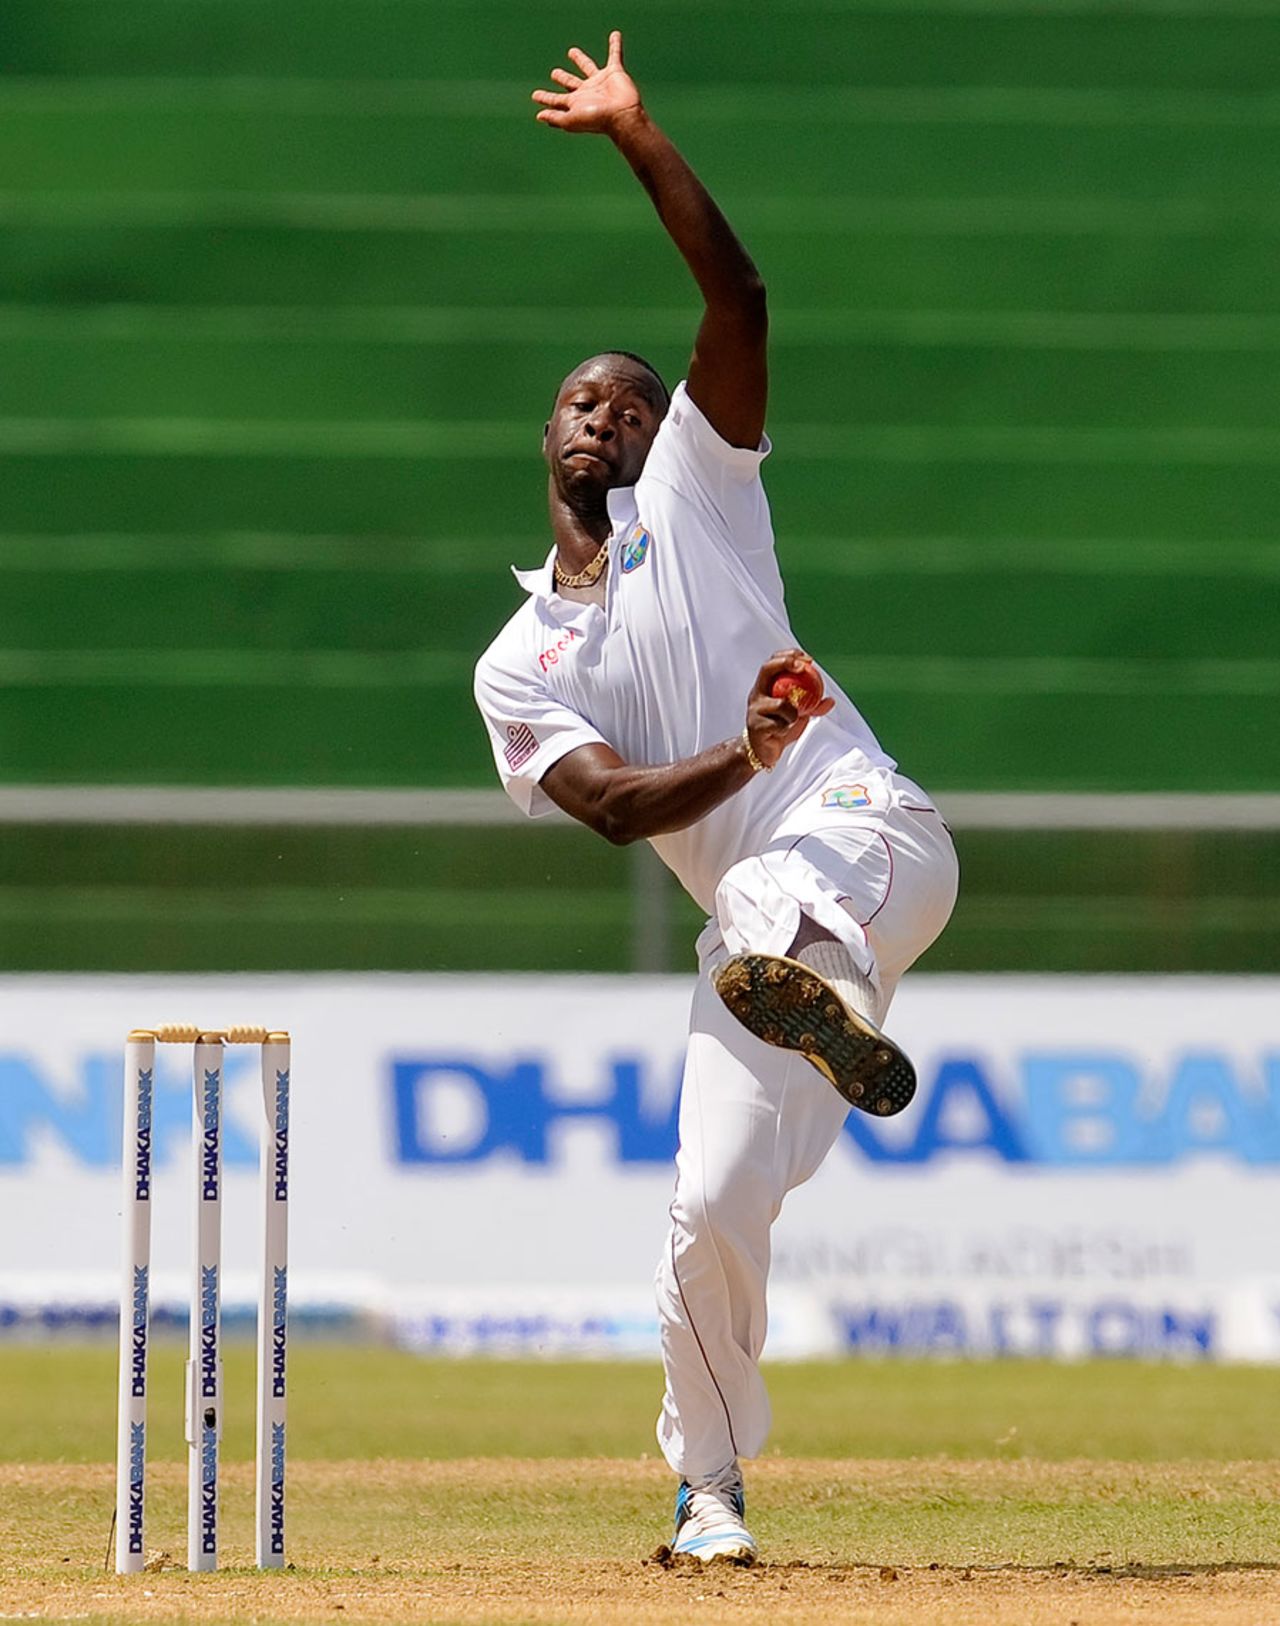 Kemar Roach finished with four wickets in the second innings, West Indies v Bangladesh, 1st Test, St. Vincent, 5th day, September 9, 2014